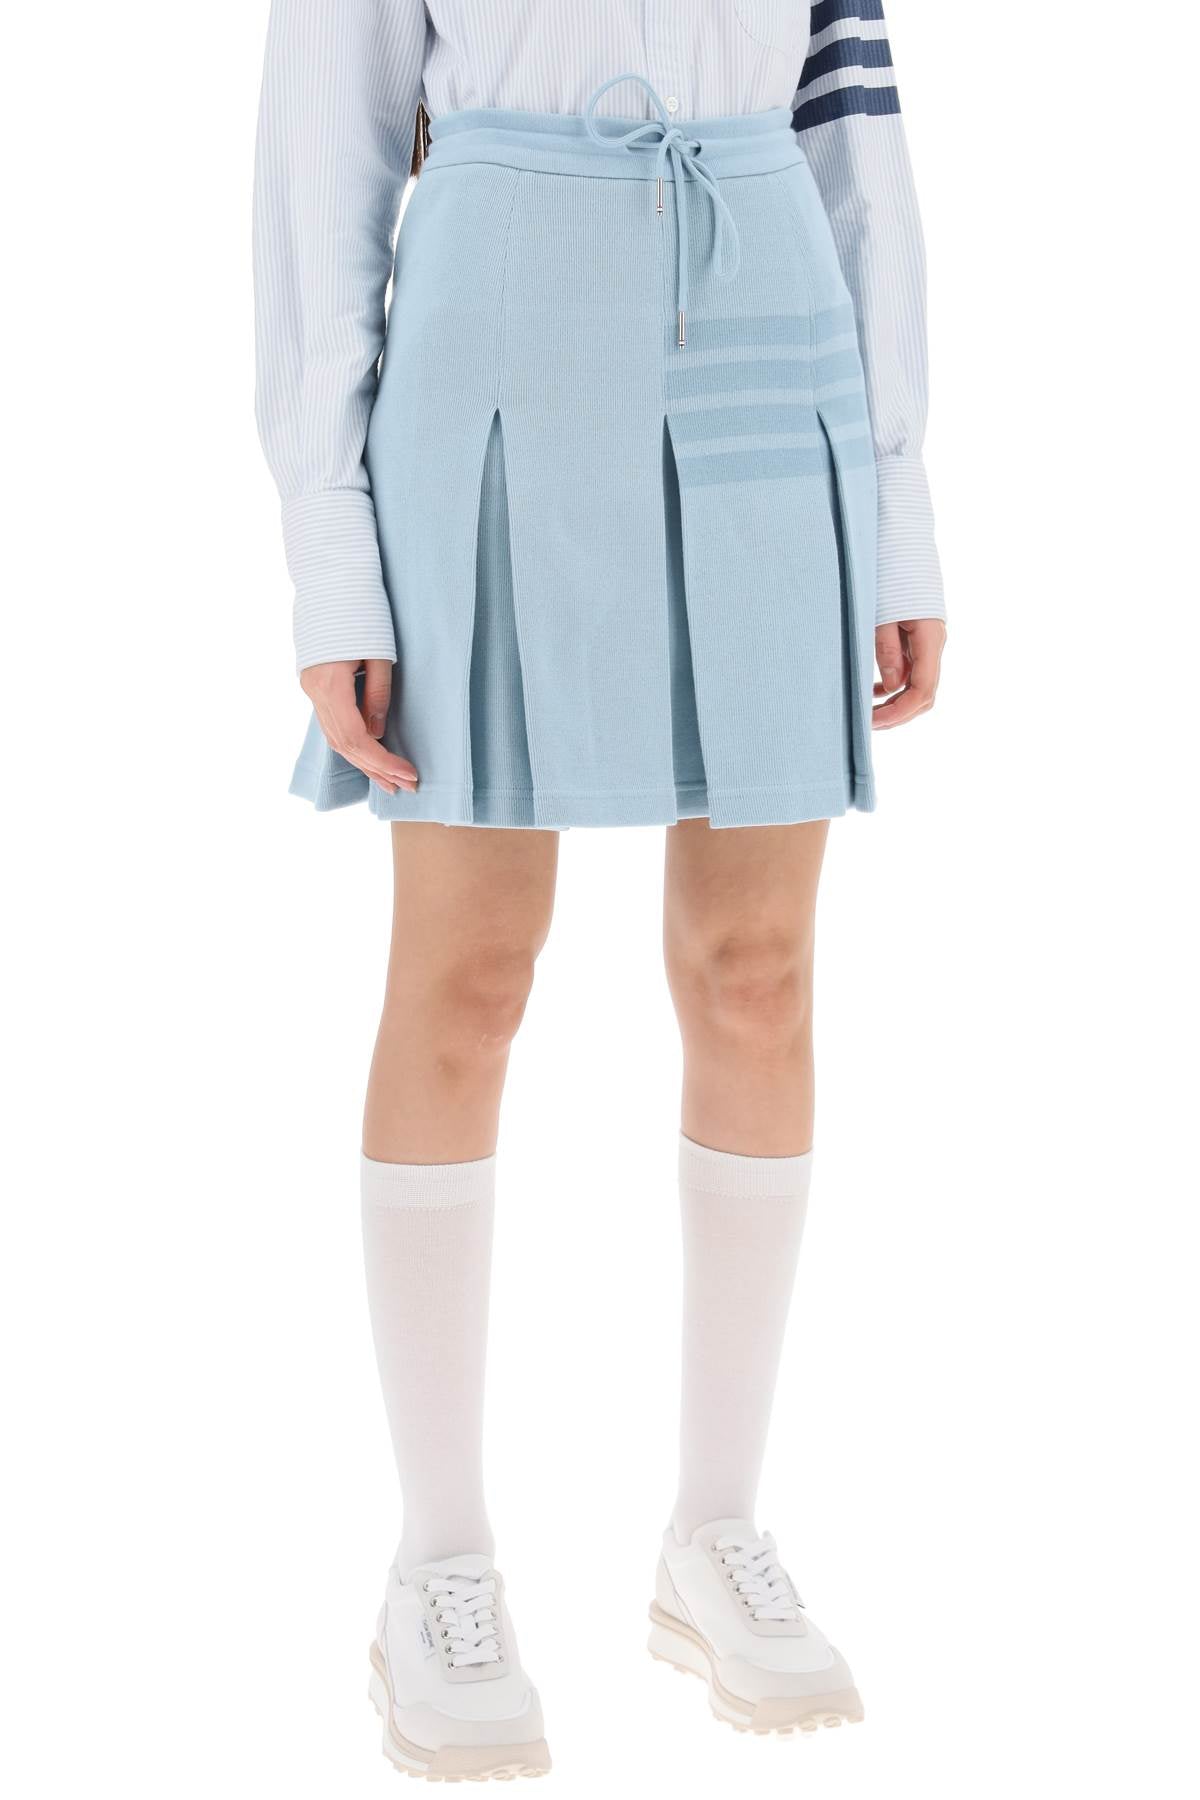 Thom browne knitted 4-bar pleated skirt-1